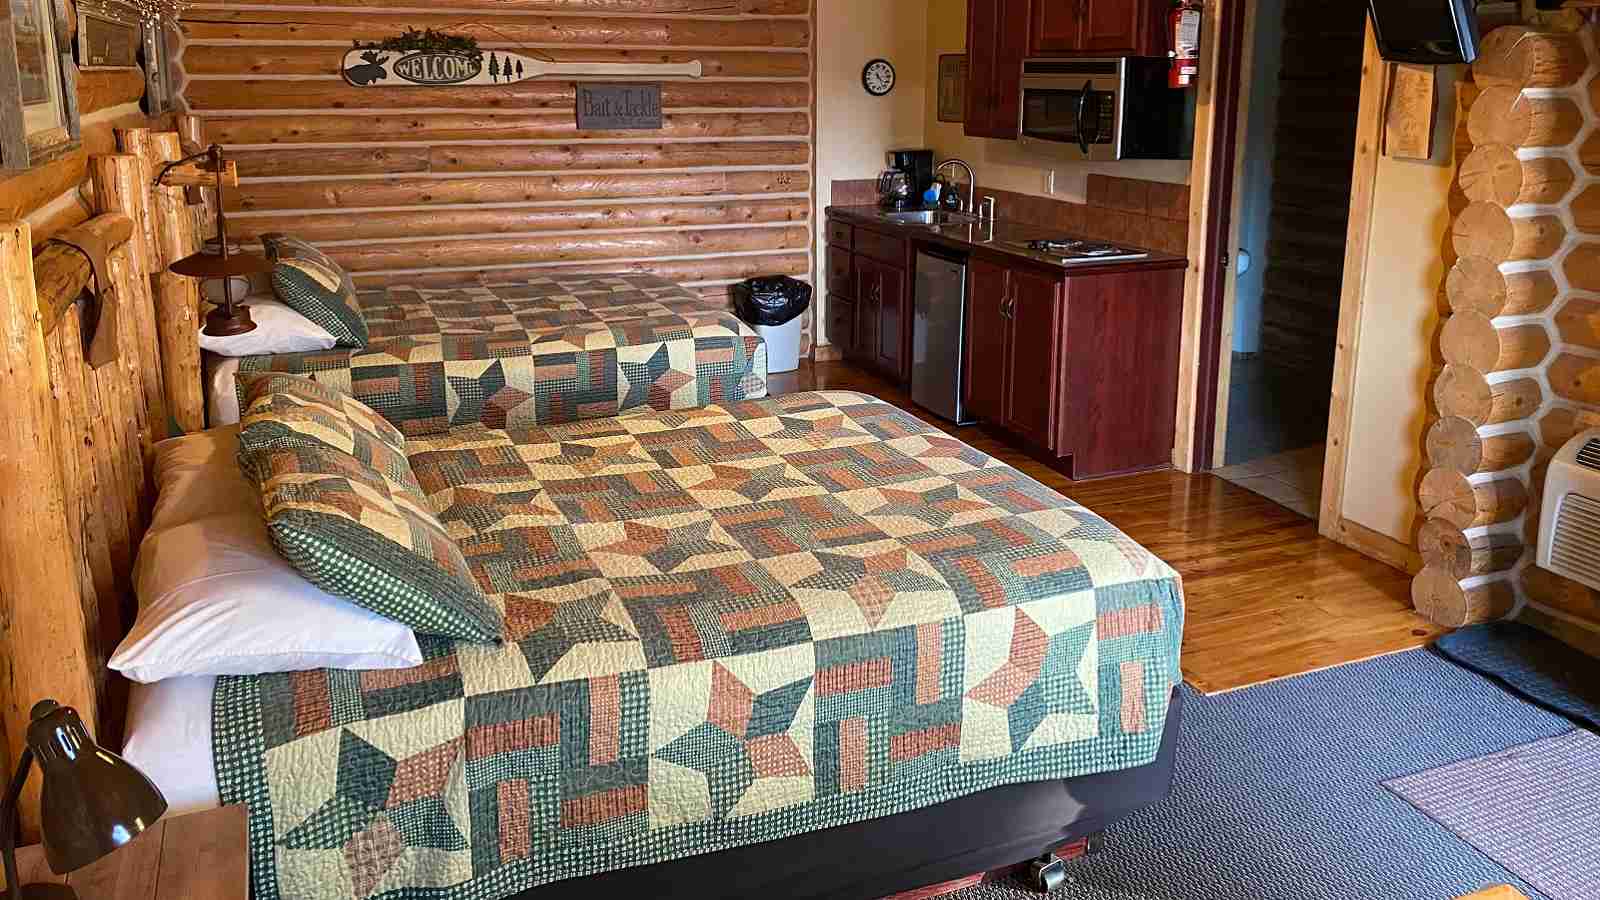 Interior of a cabin at the Lure Me Inn in Ennis, Montana with two queen beds and a kitchenette.